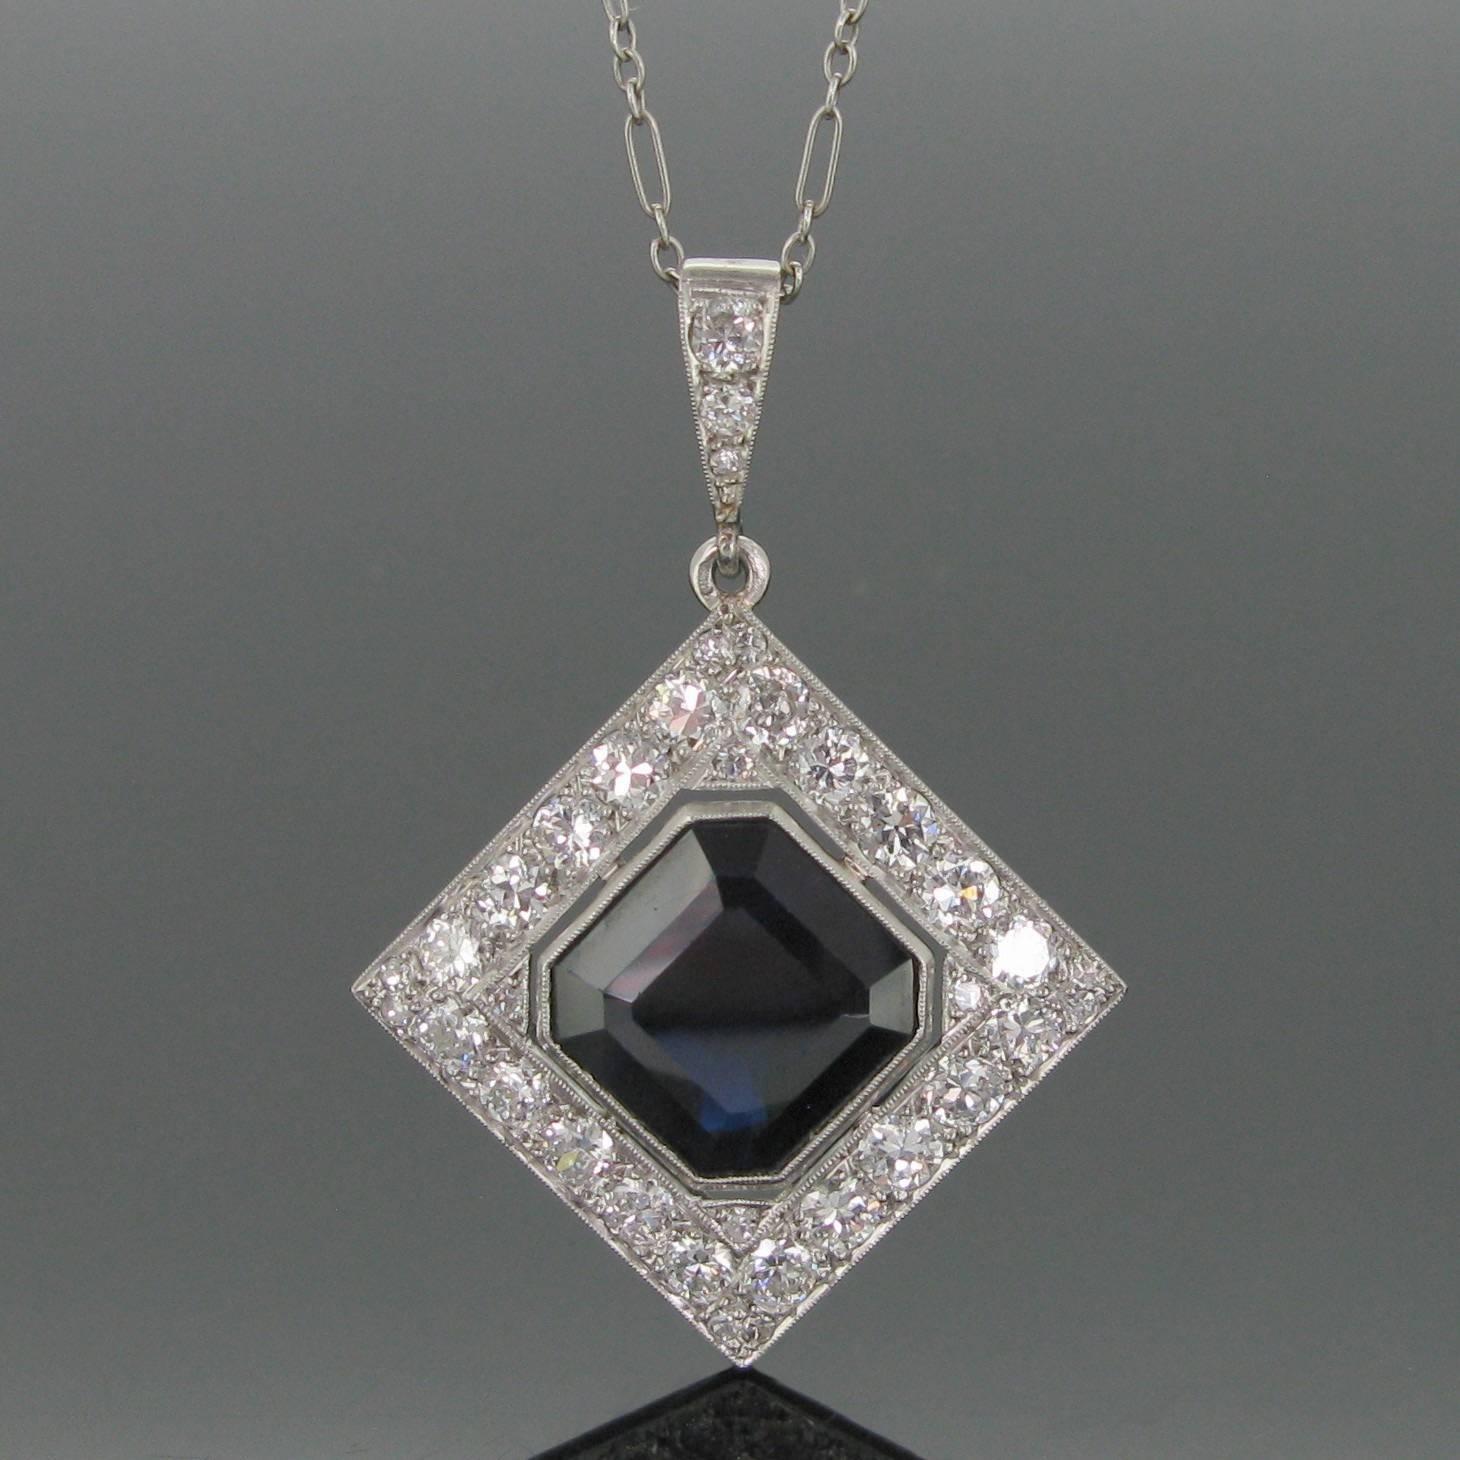 This beautiful pendant is set with a deep blue sapphire weighing approximately 8ct and framed with diamonds with an approximate total carat weight of 2ct. The bale and the clasp are also set with diamonds. The diamonds are set into a millegrain